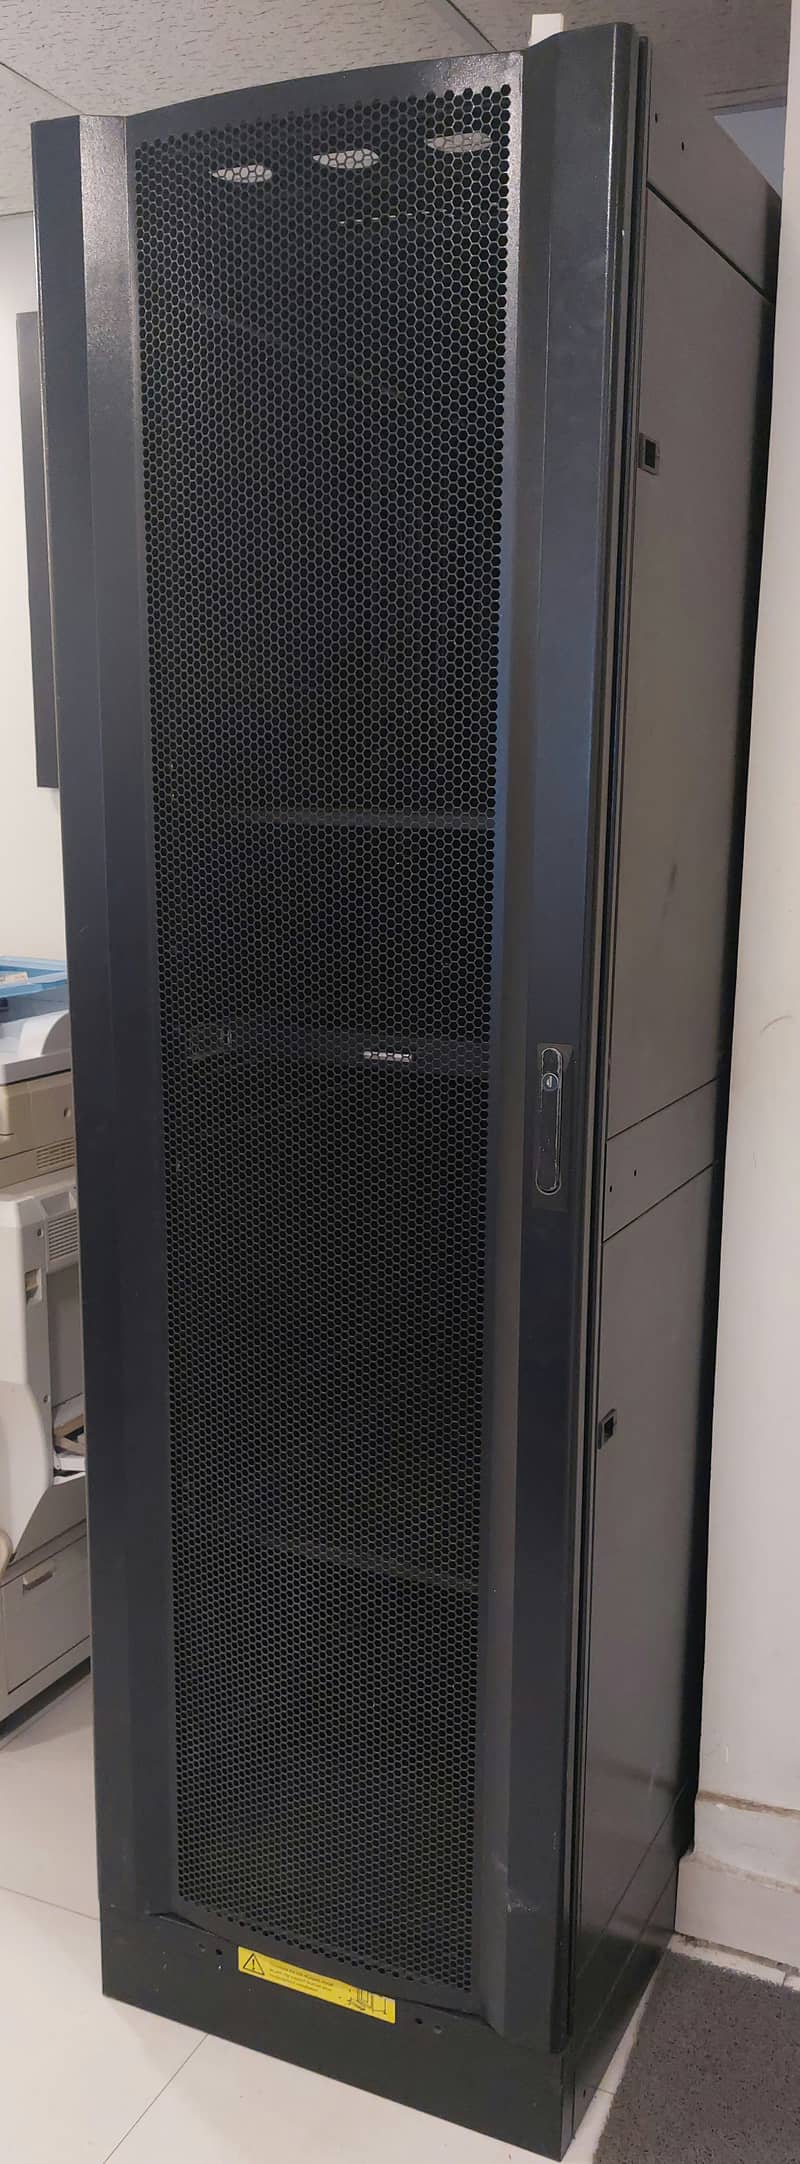 NETWORK AND SERVER RACK 2